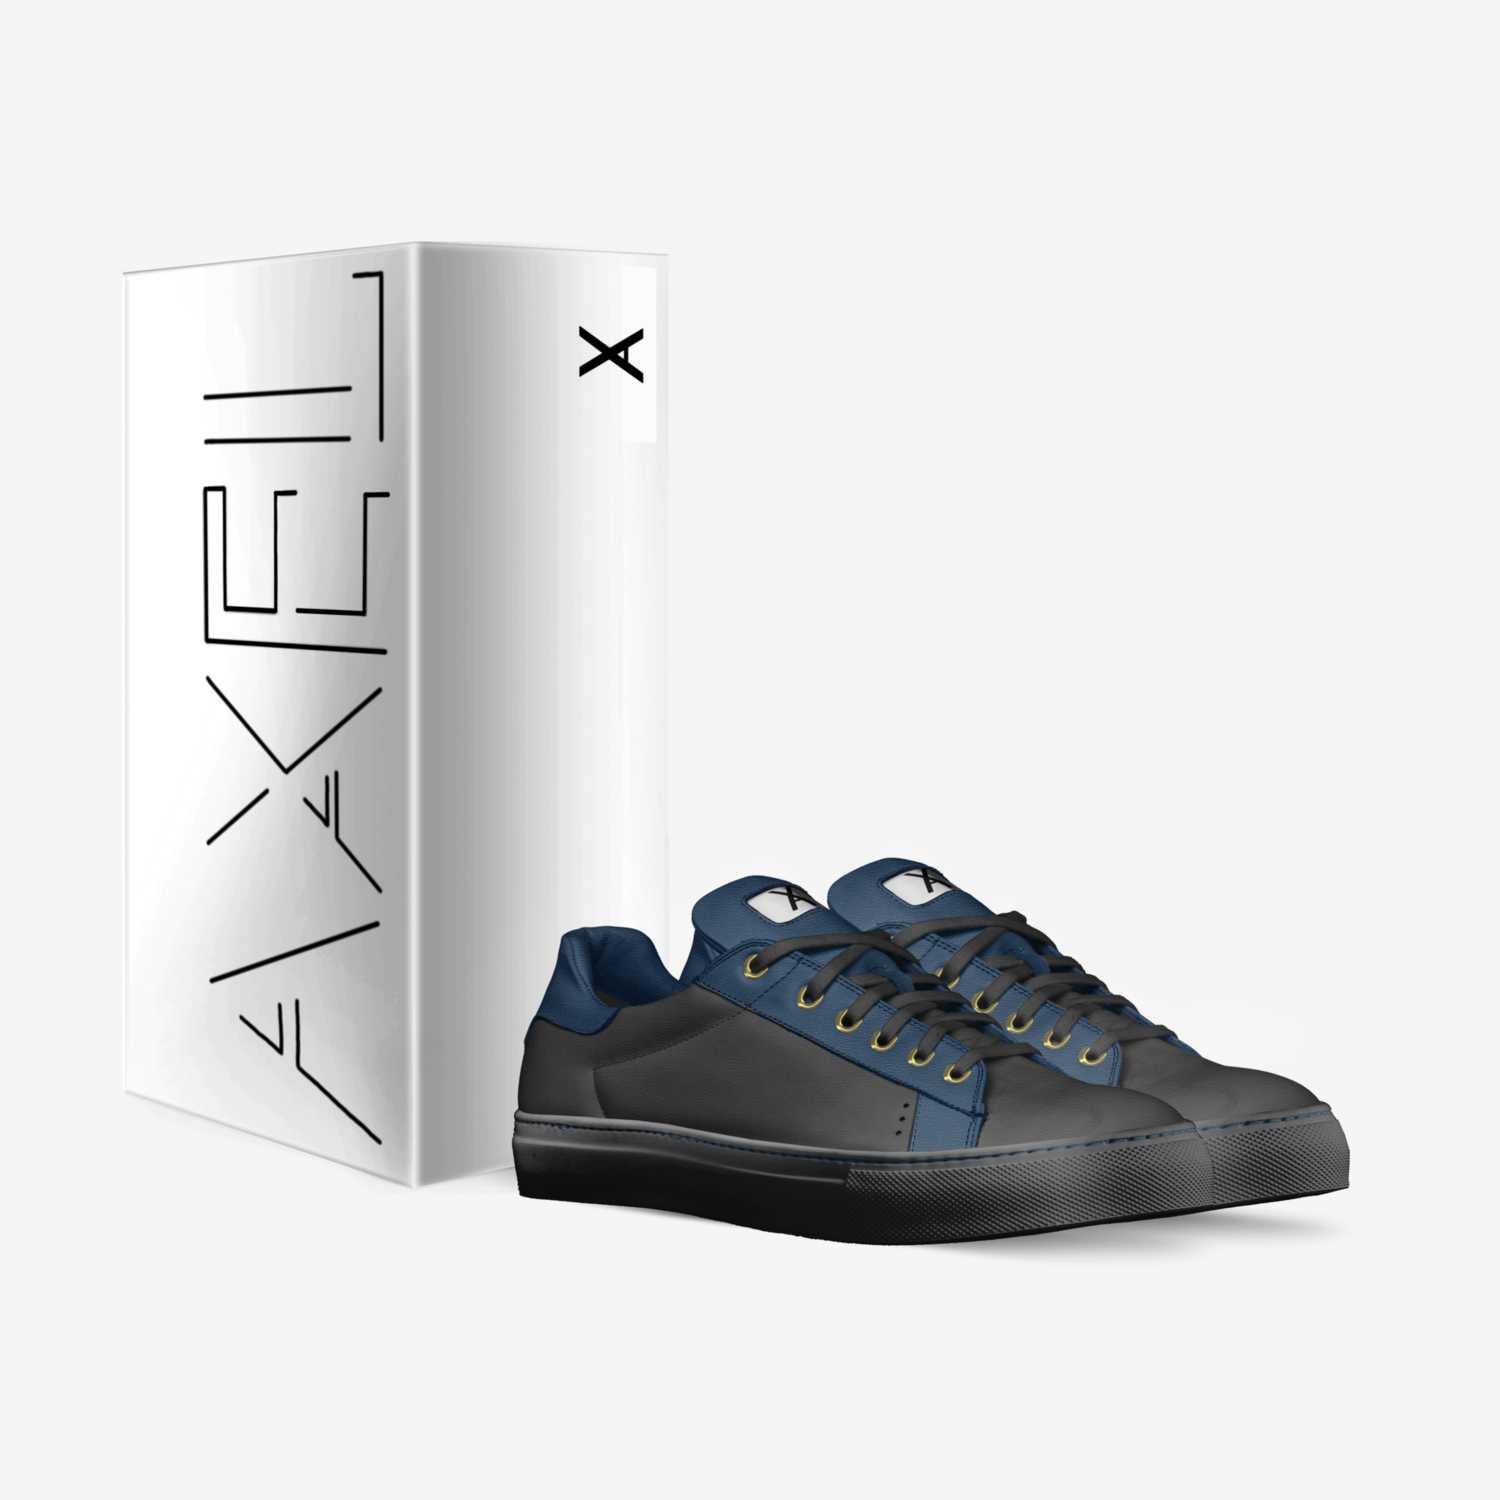 Ax1 custom made in Italy shoes by Axel Eason | Box view